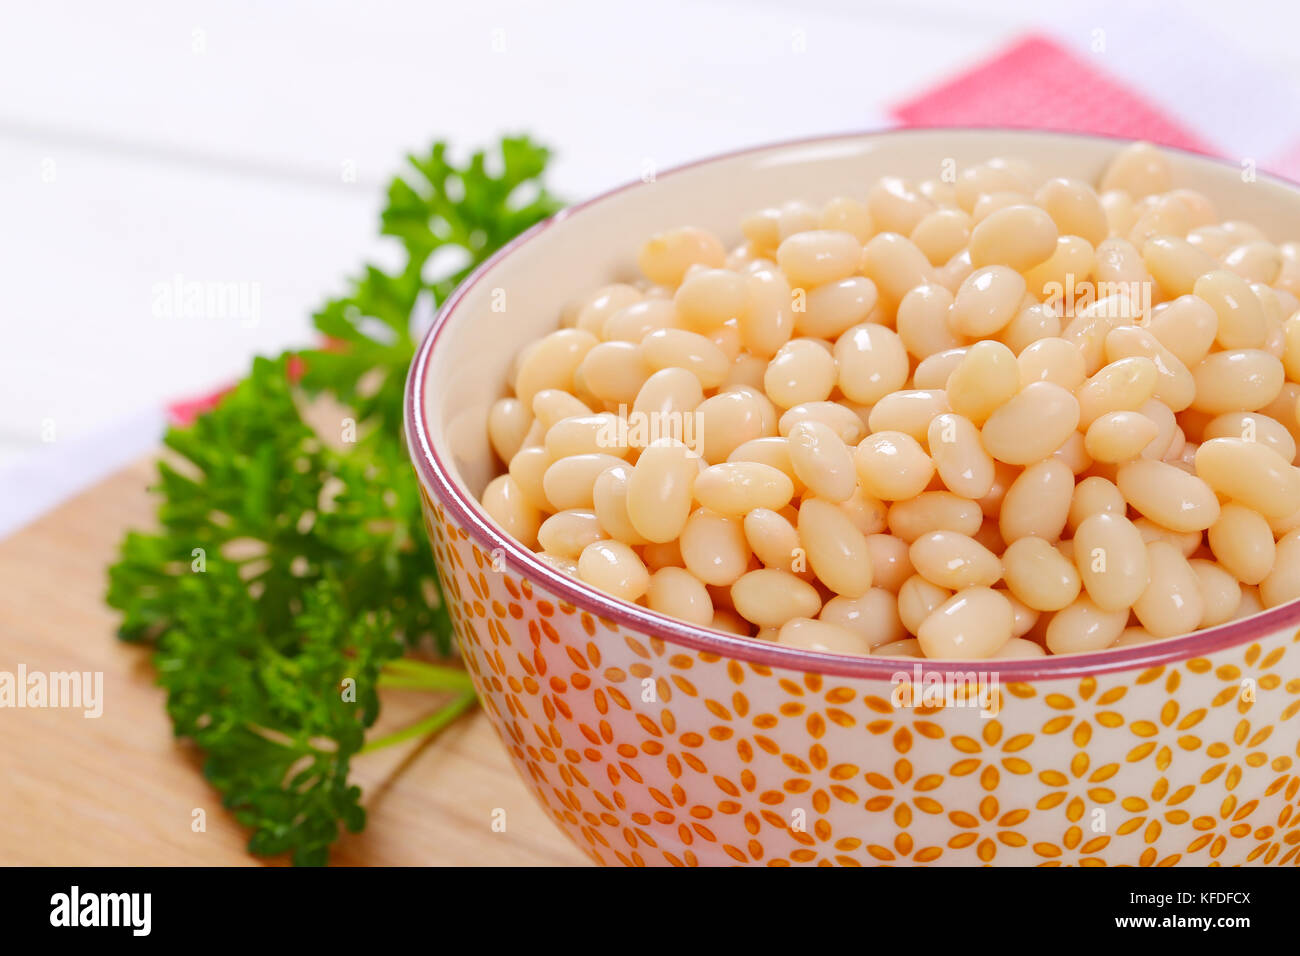 bowl of canned white beans on wooden cutting board - close up Stock Photo